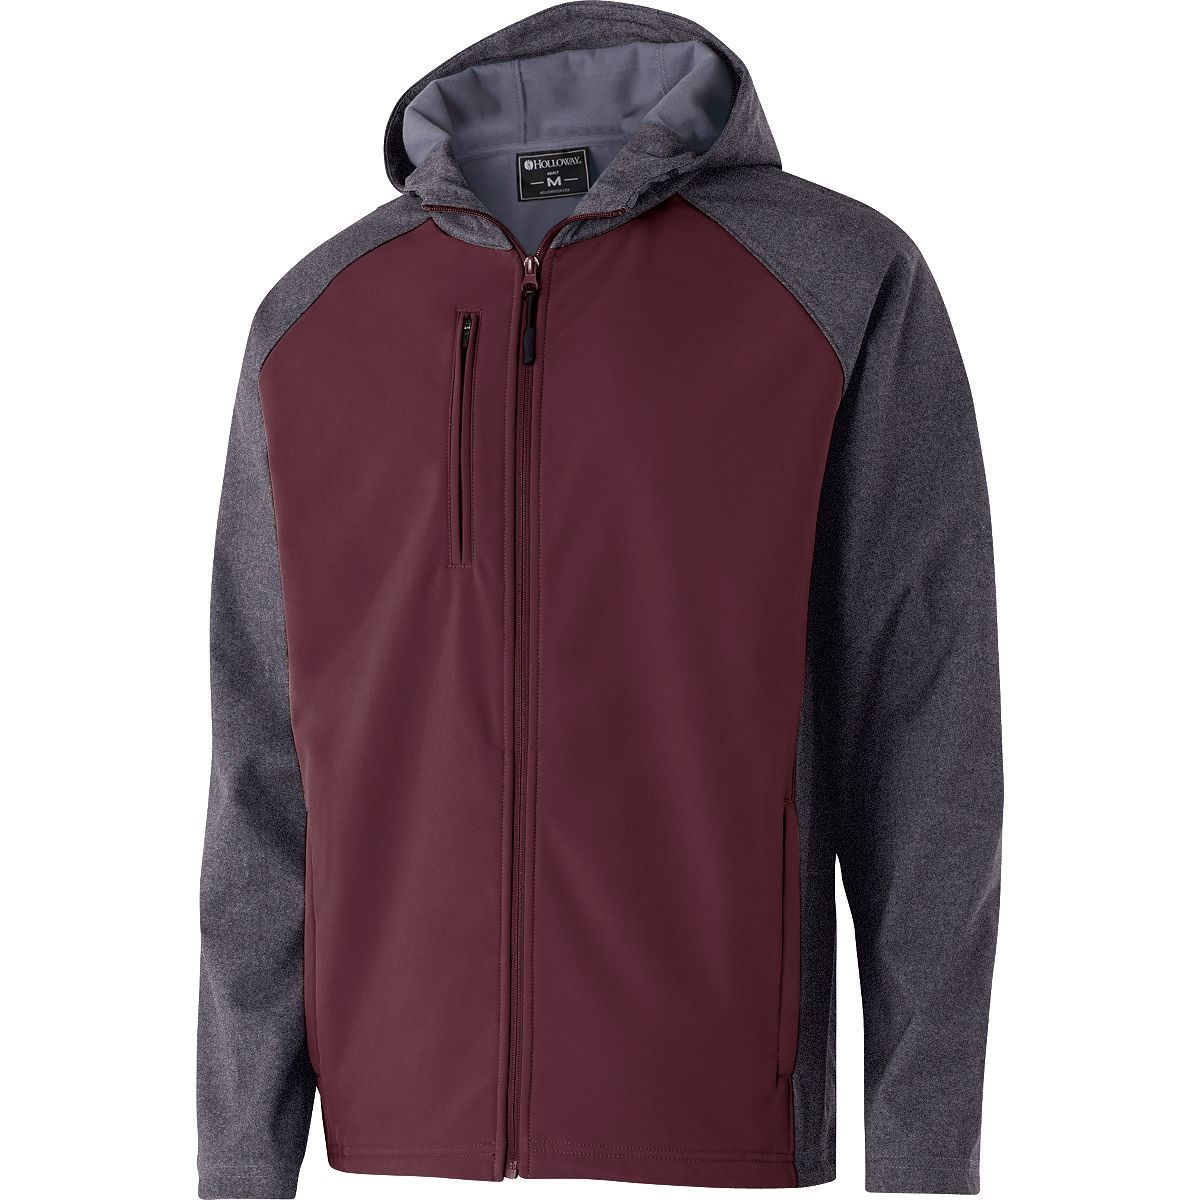 Holloway Raider Softshell Jacket in Carbon Print/Maroon  -Part of the Adult, Adult-Jacket, Holloway, Outerwear product lines at KanaleyCreations.com